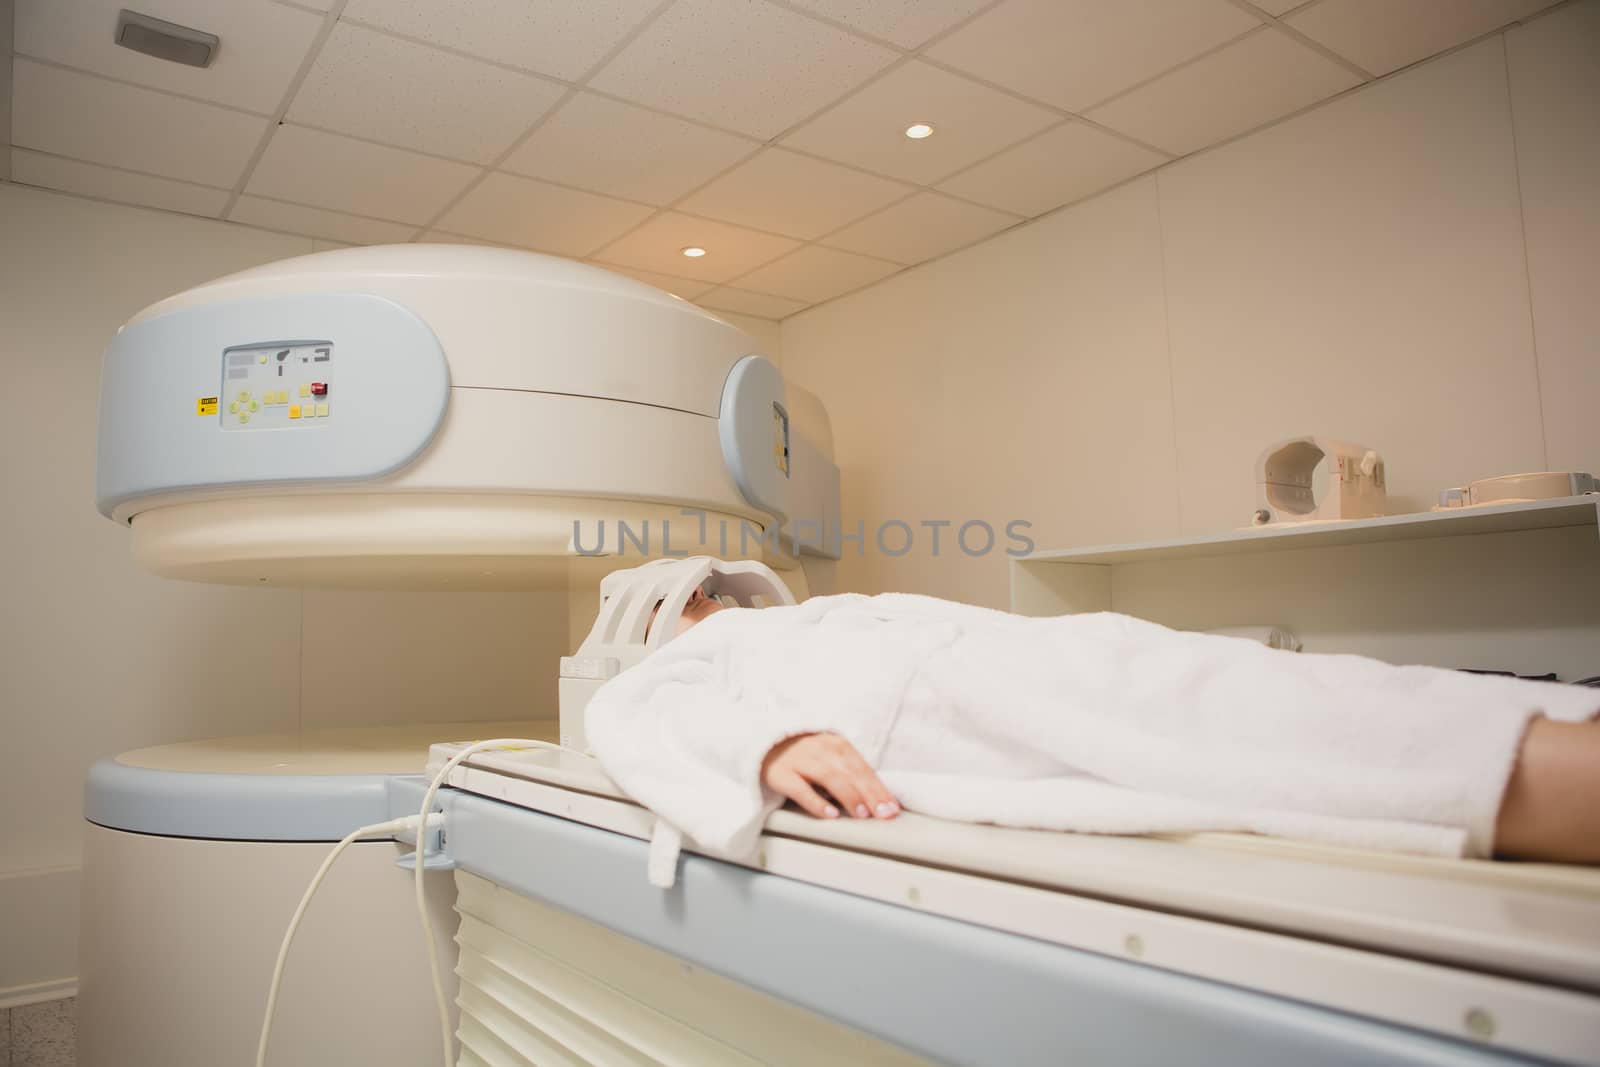 Patient being scanned and diagnosed on a computed tomography scanner in a hospital. Modern medical equipment, medicine and health care concept.